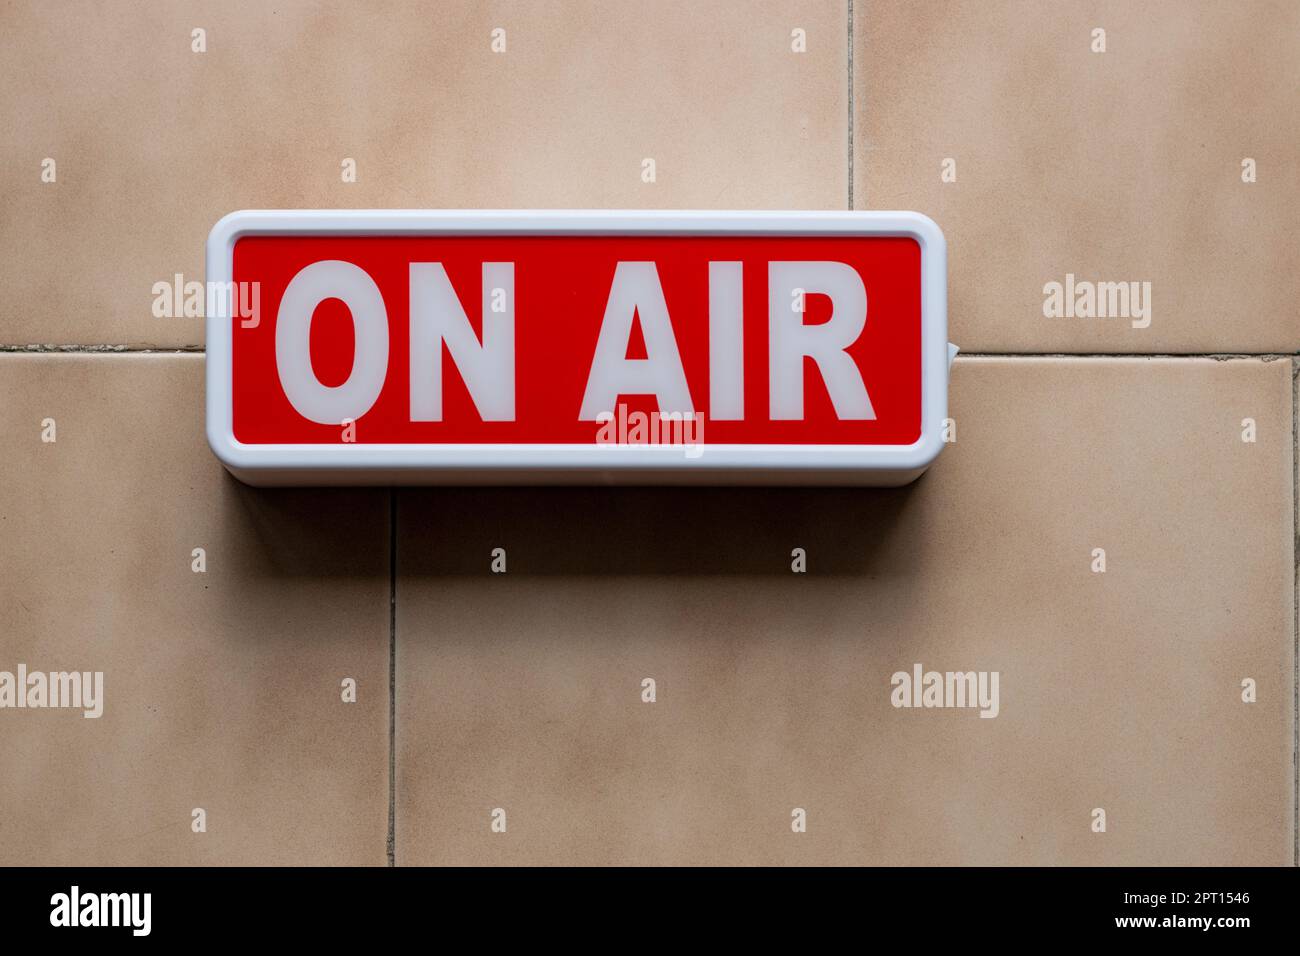 https://c8.alamy.com/comp/2PT1546/poster-sign-or-signal-with-the-warning-indication-on-air-2PT1546.jpg